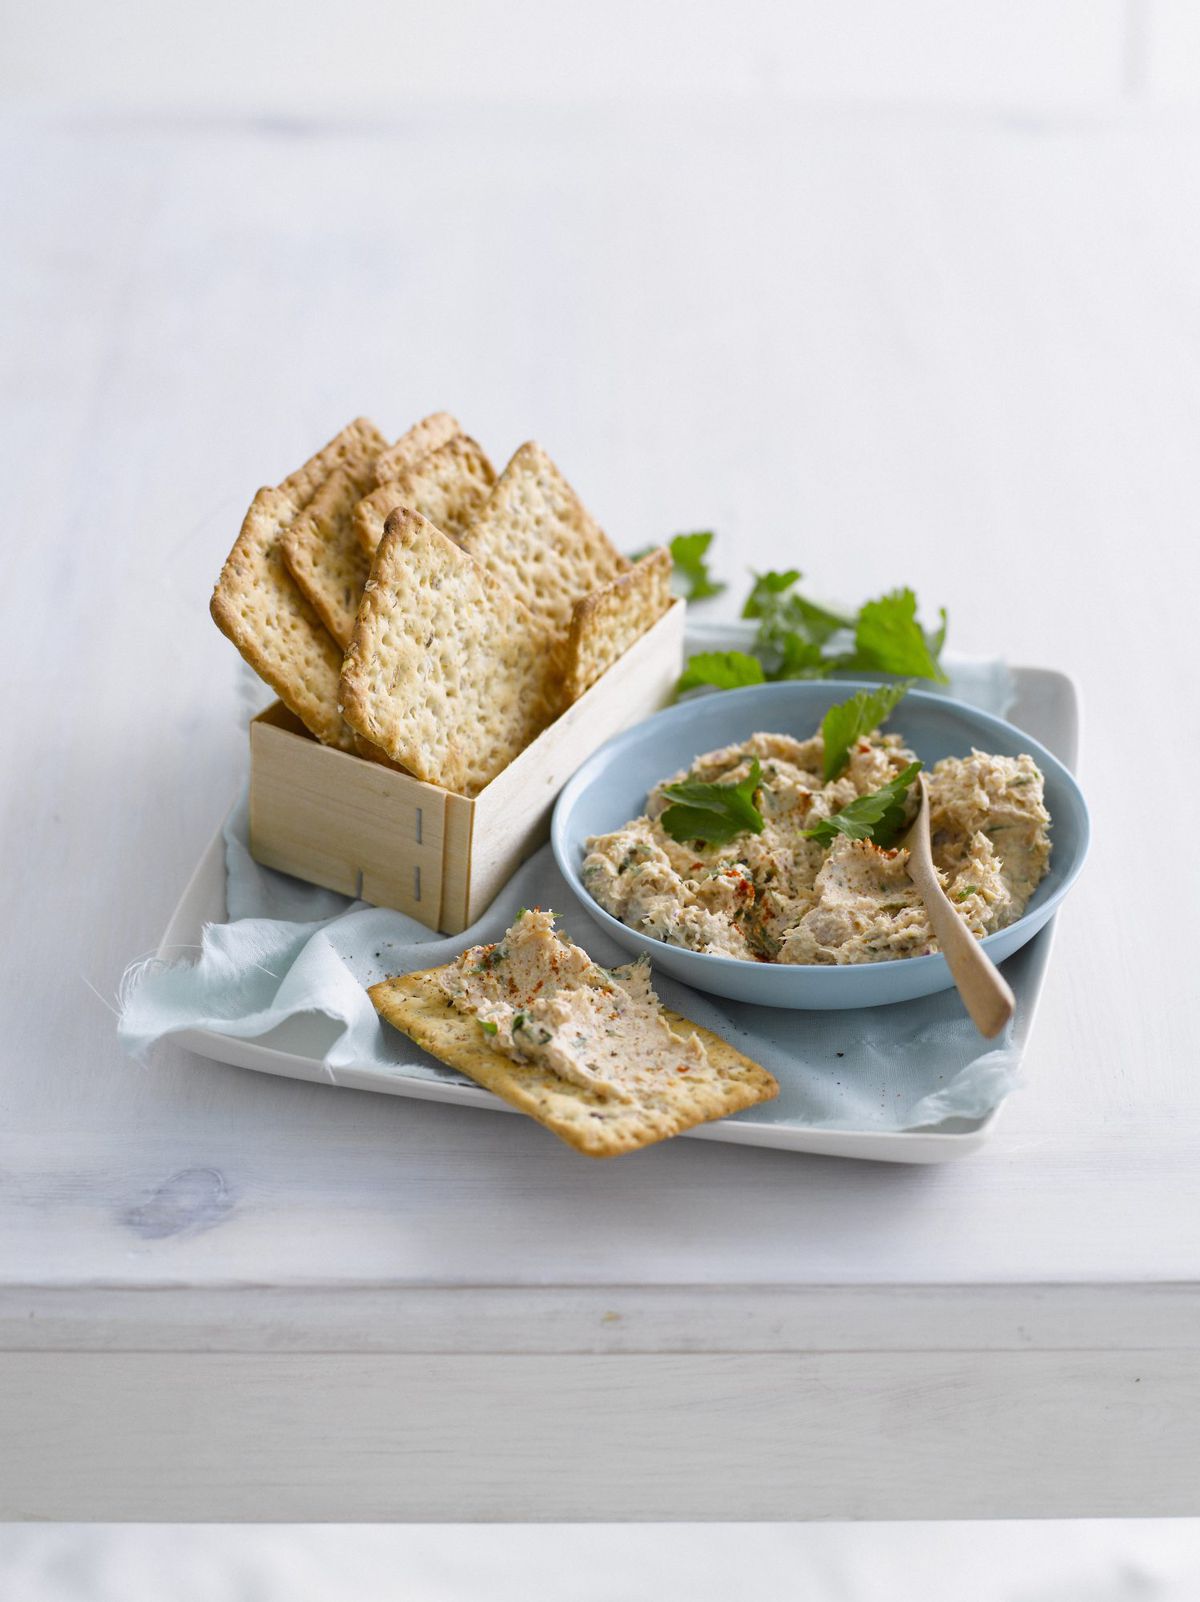 Canned tuna on whole-wheat crackers